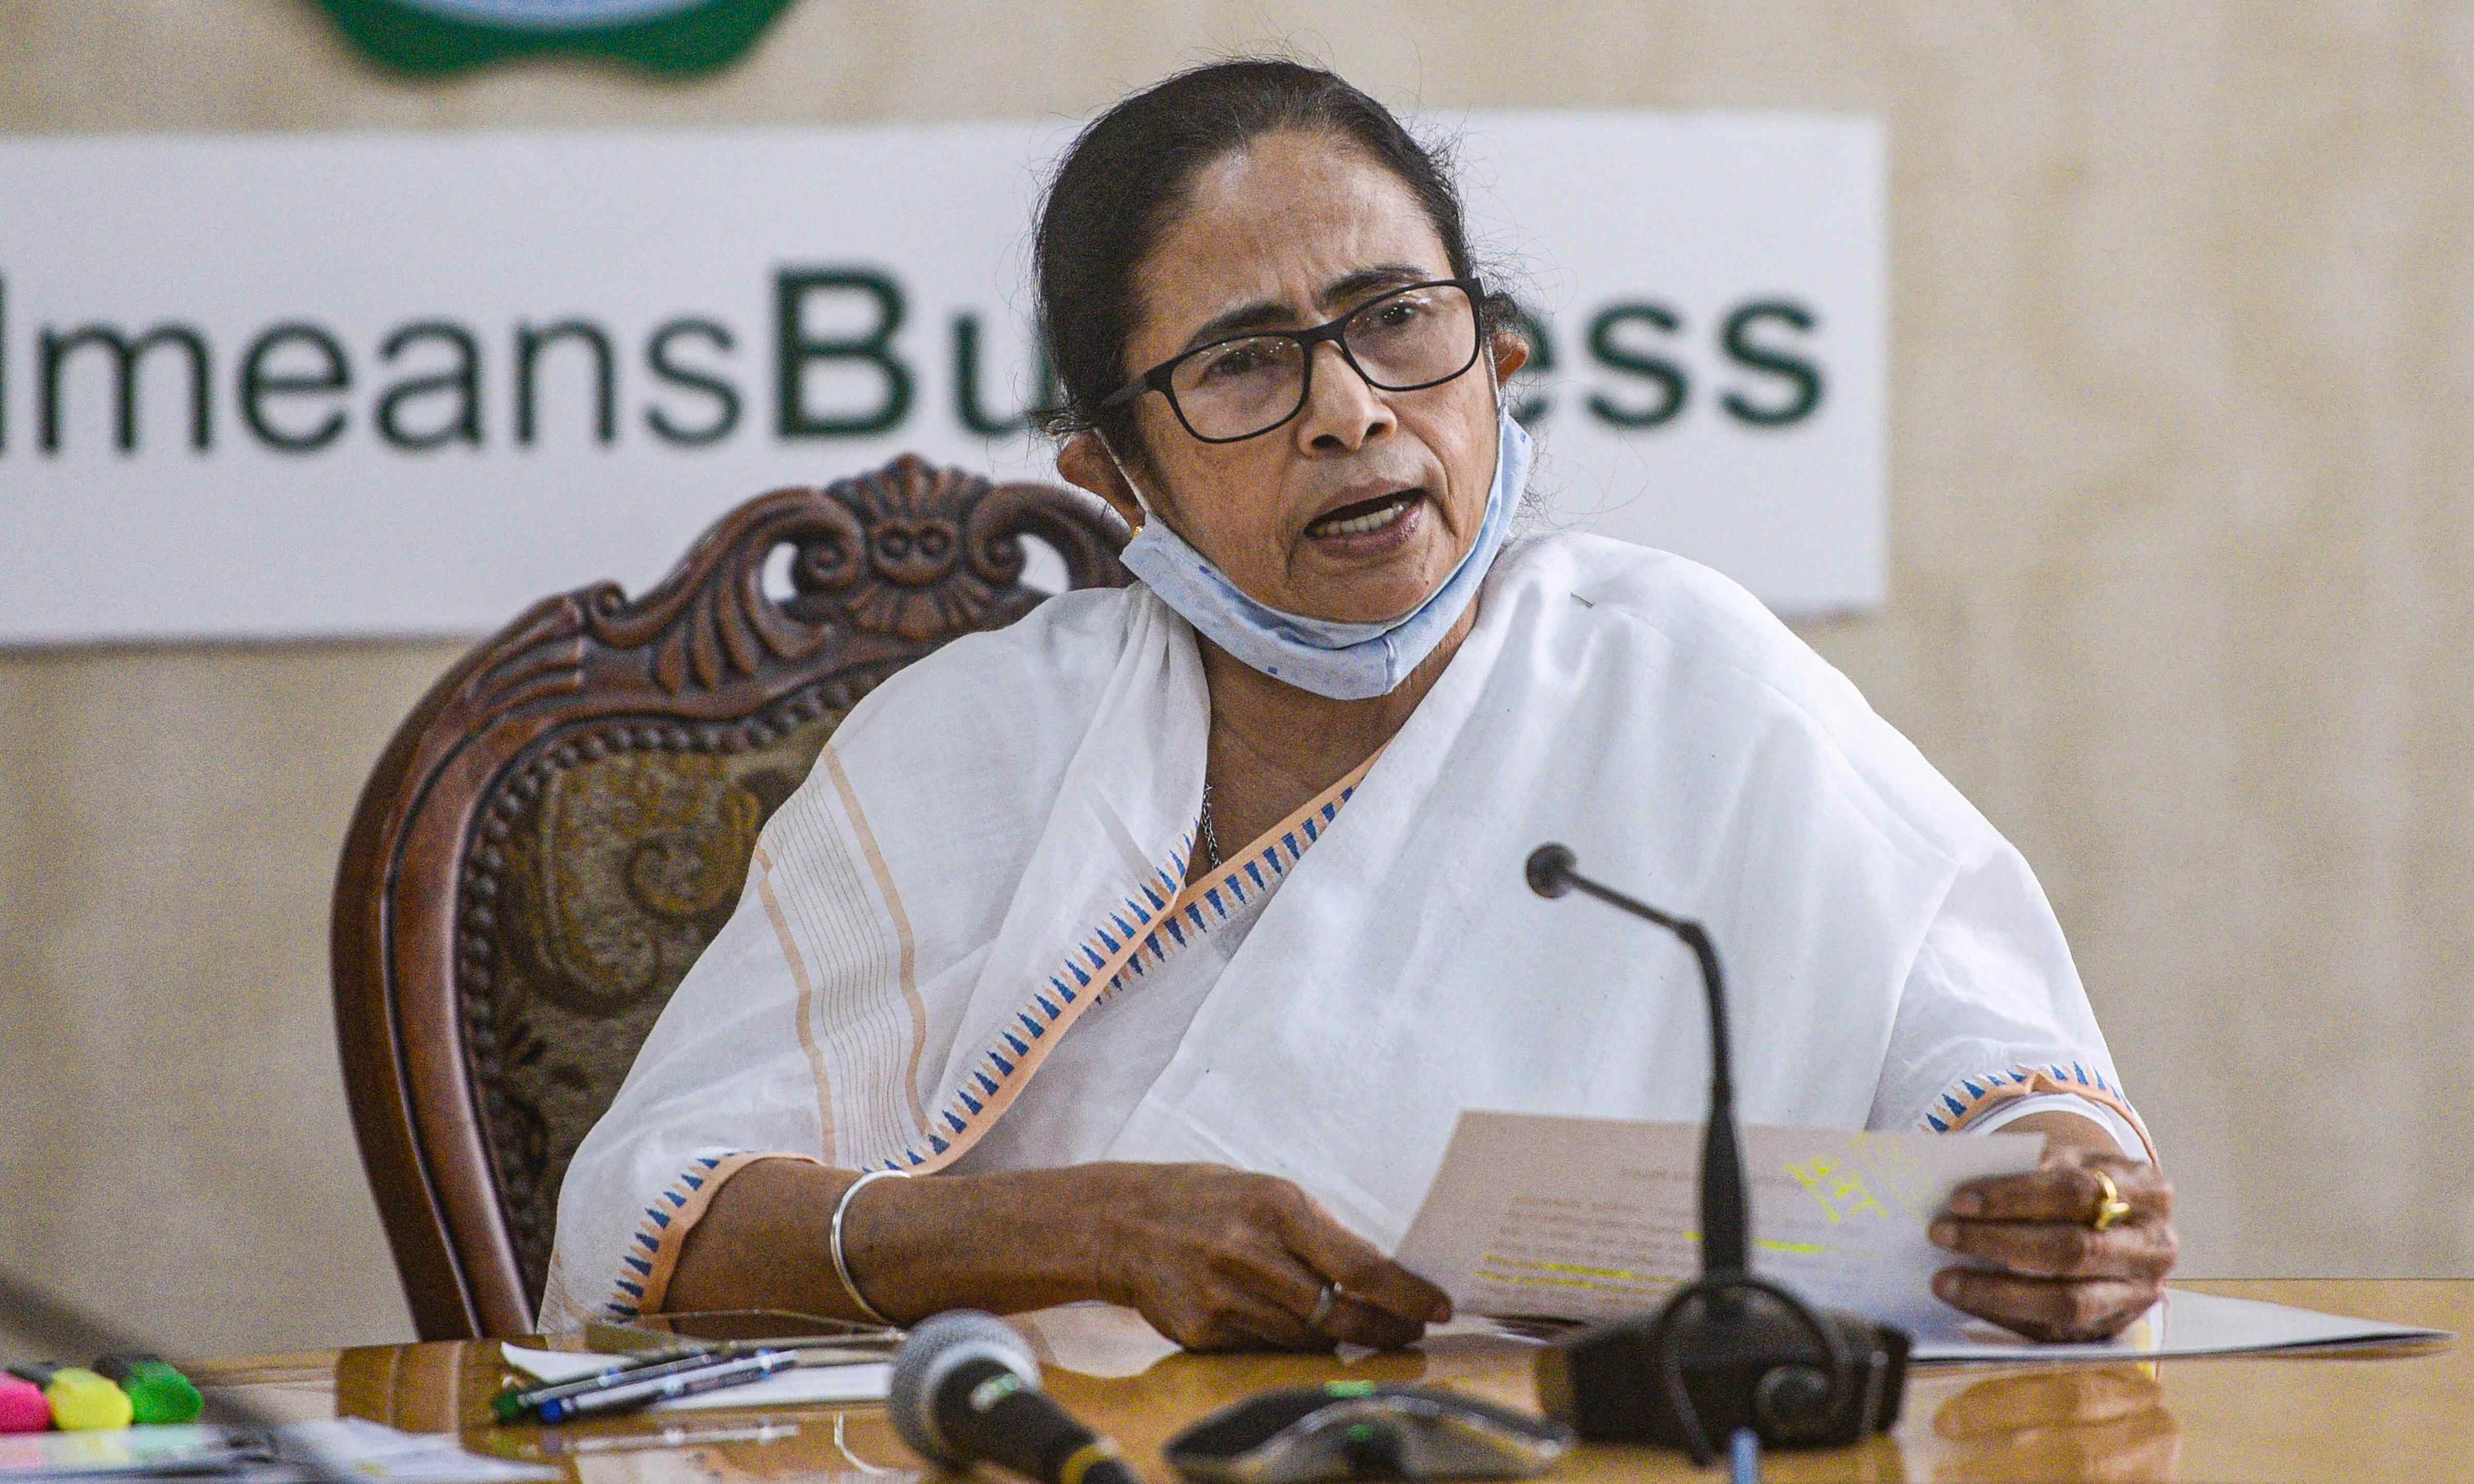 Mamata prays for well-being of all on occasion of Christmas, asks revellers to follow COVID norms